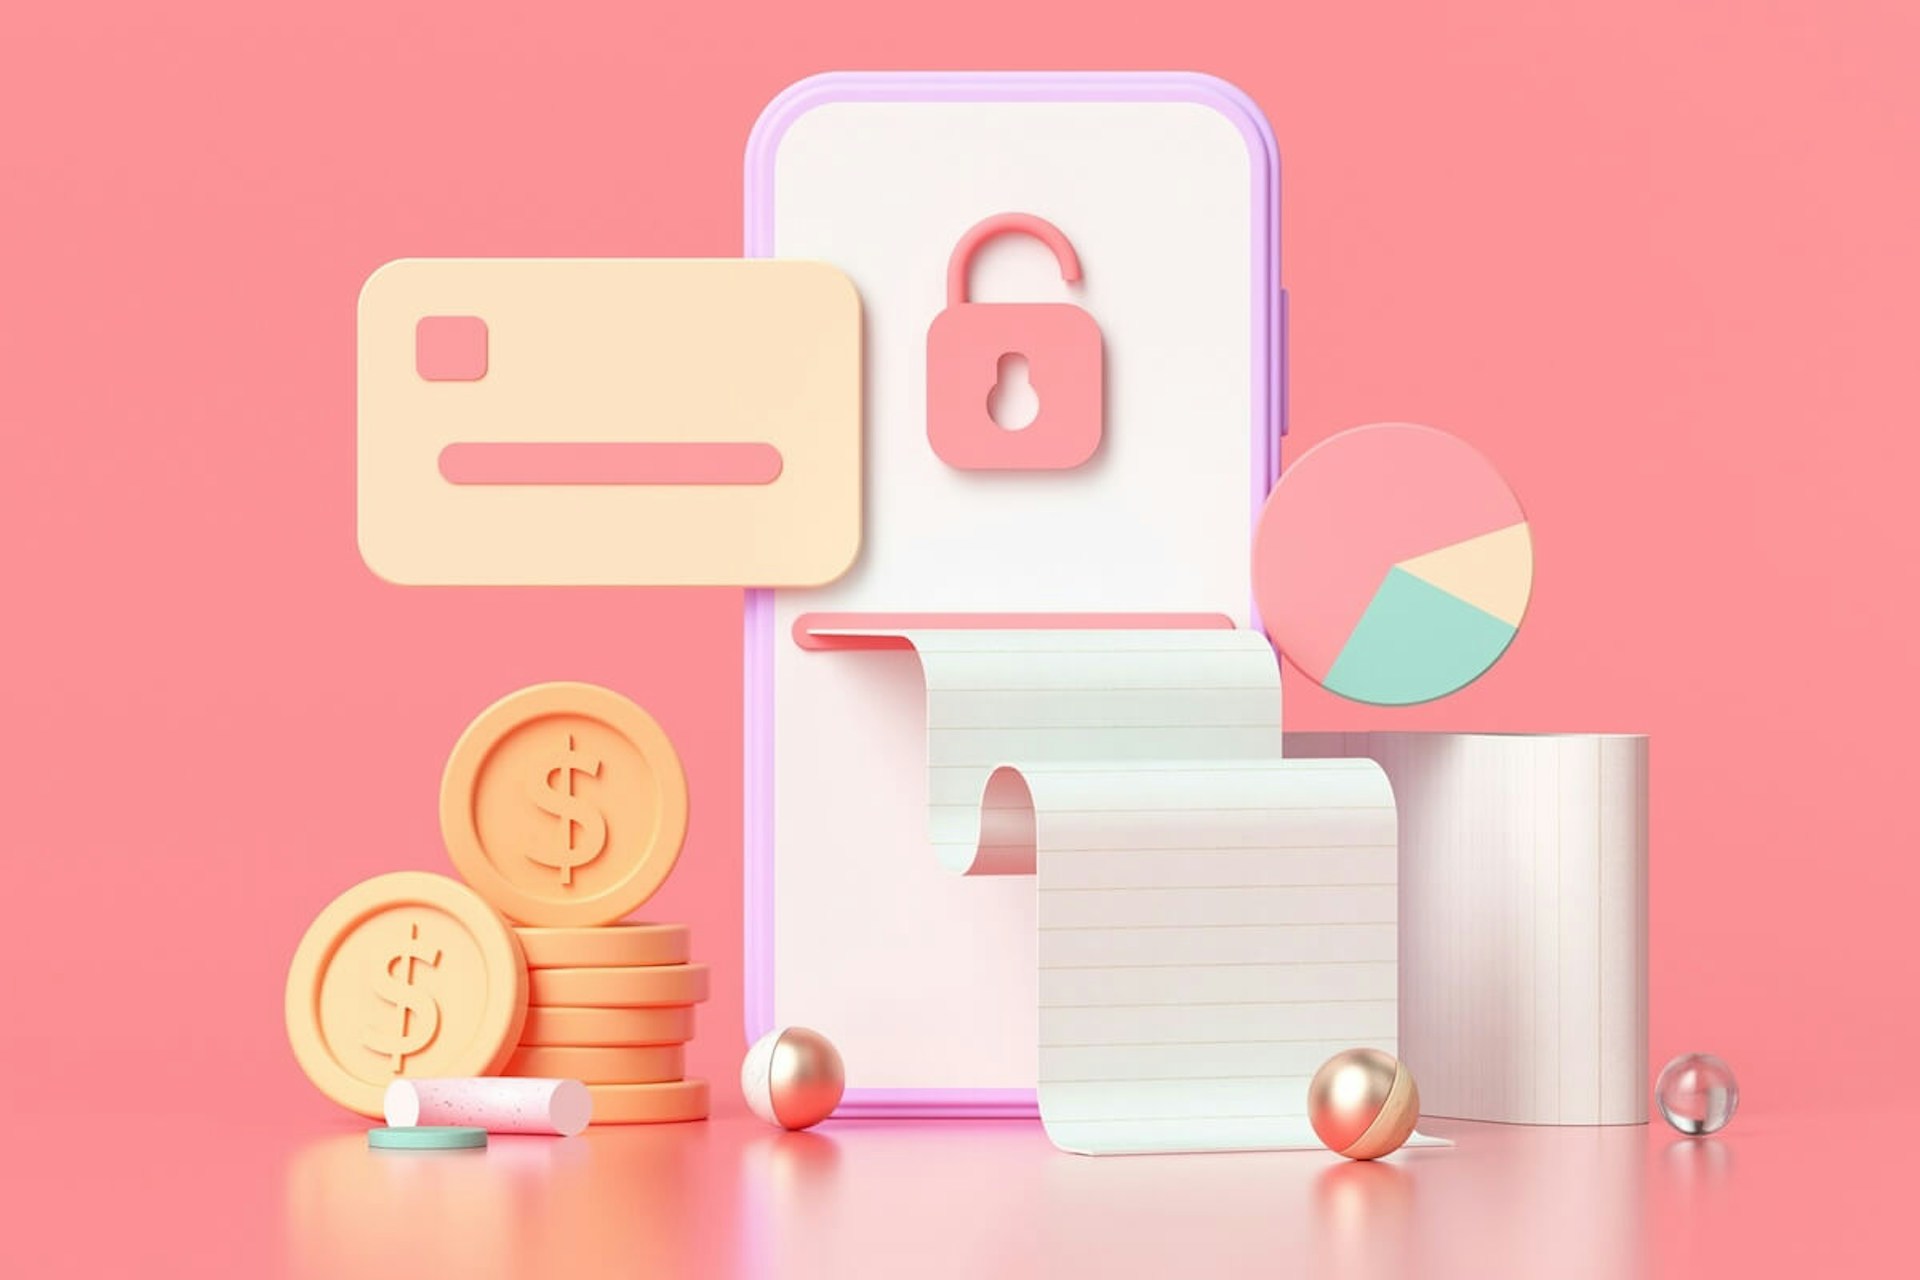 3D Illustration of icons showcasing influencer payment solutions like Klear Pay